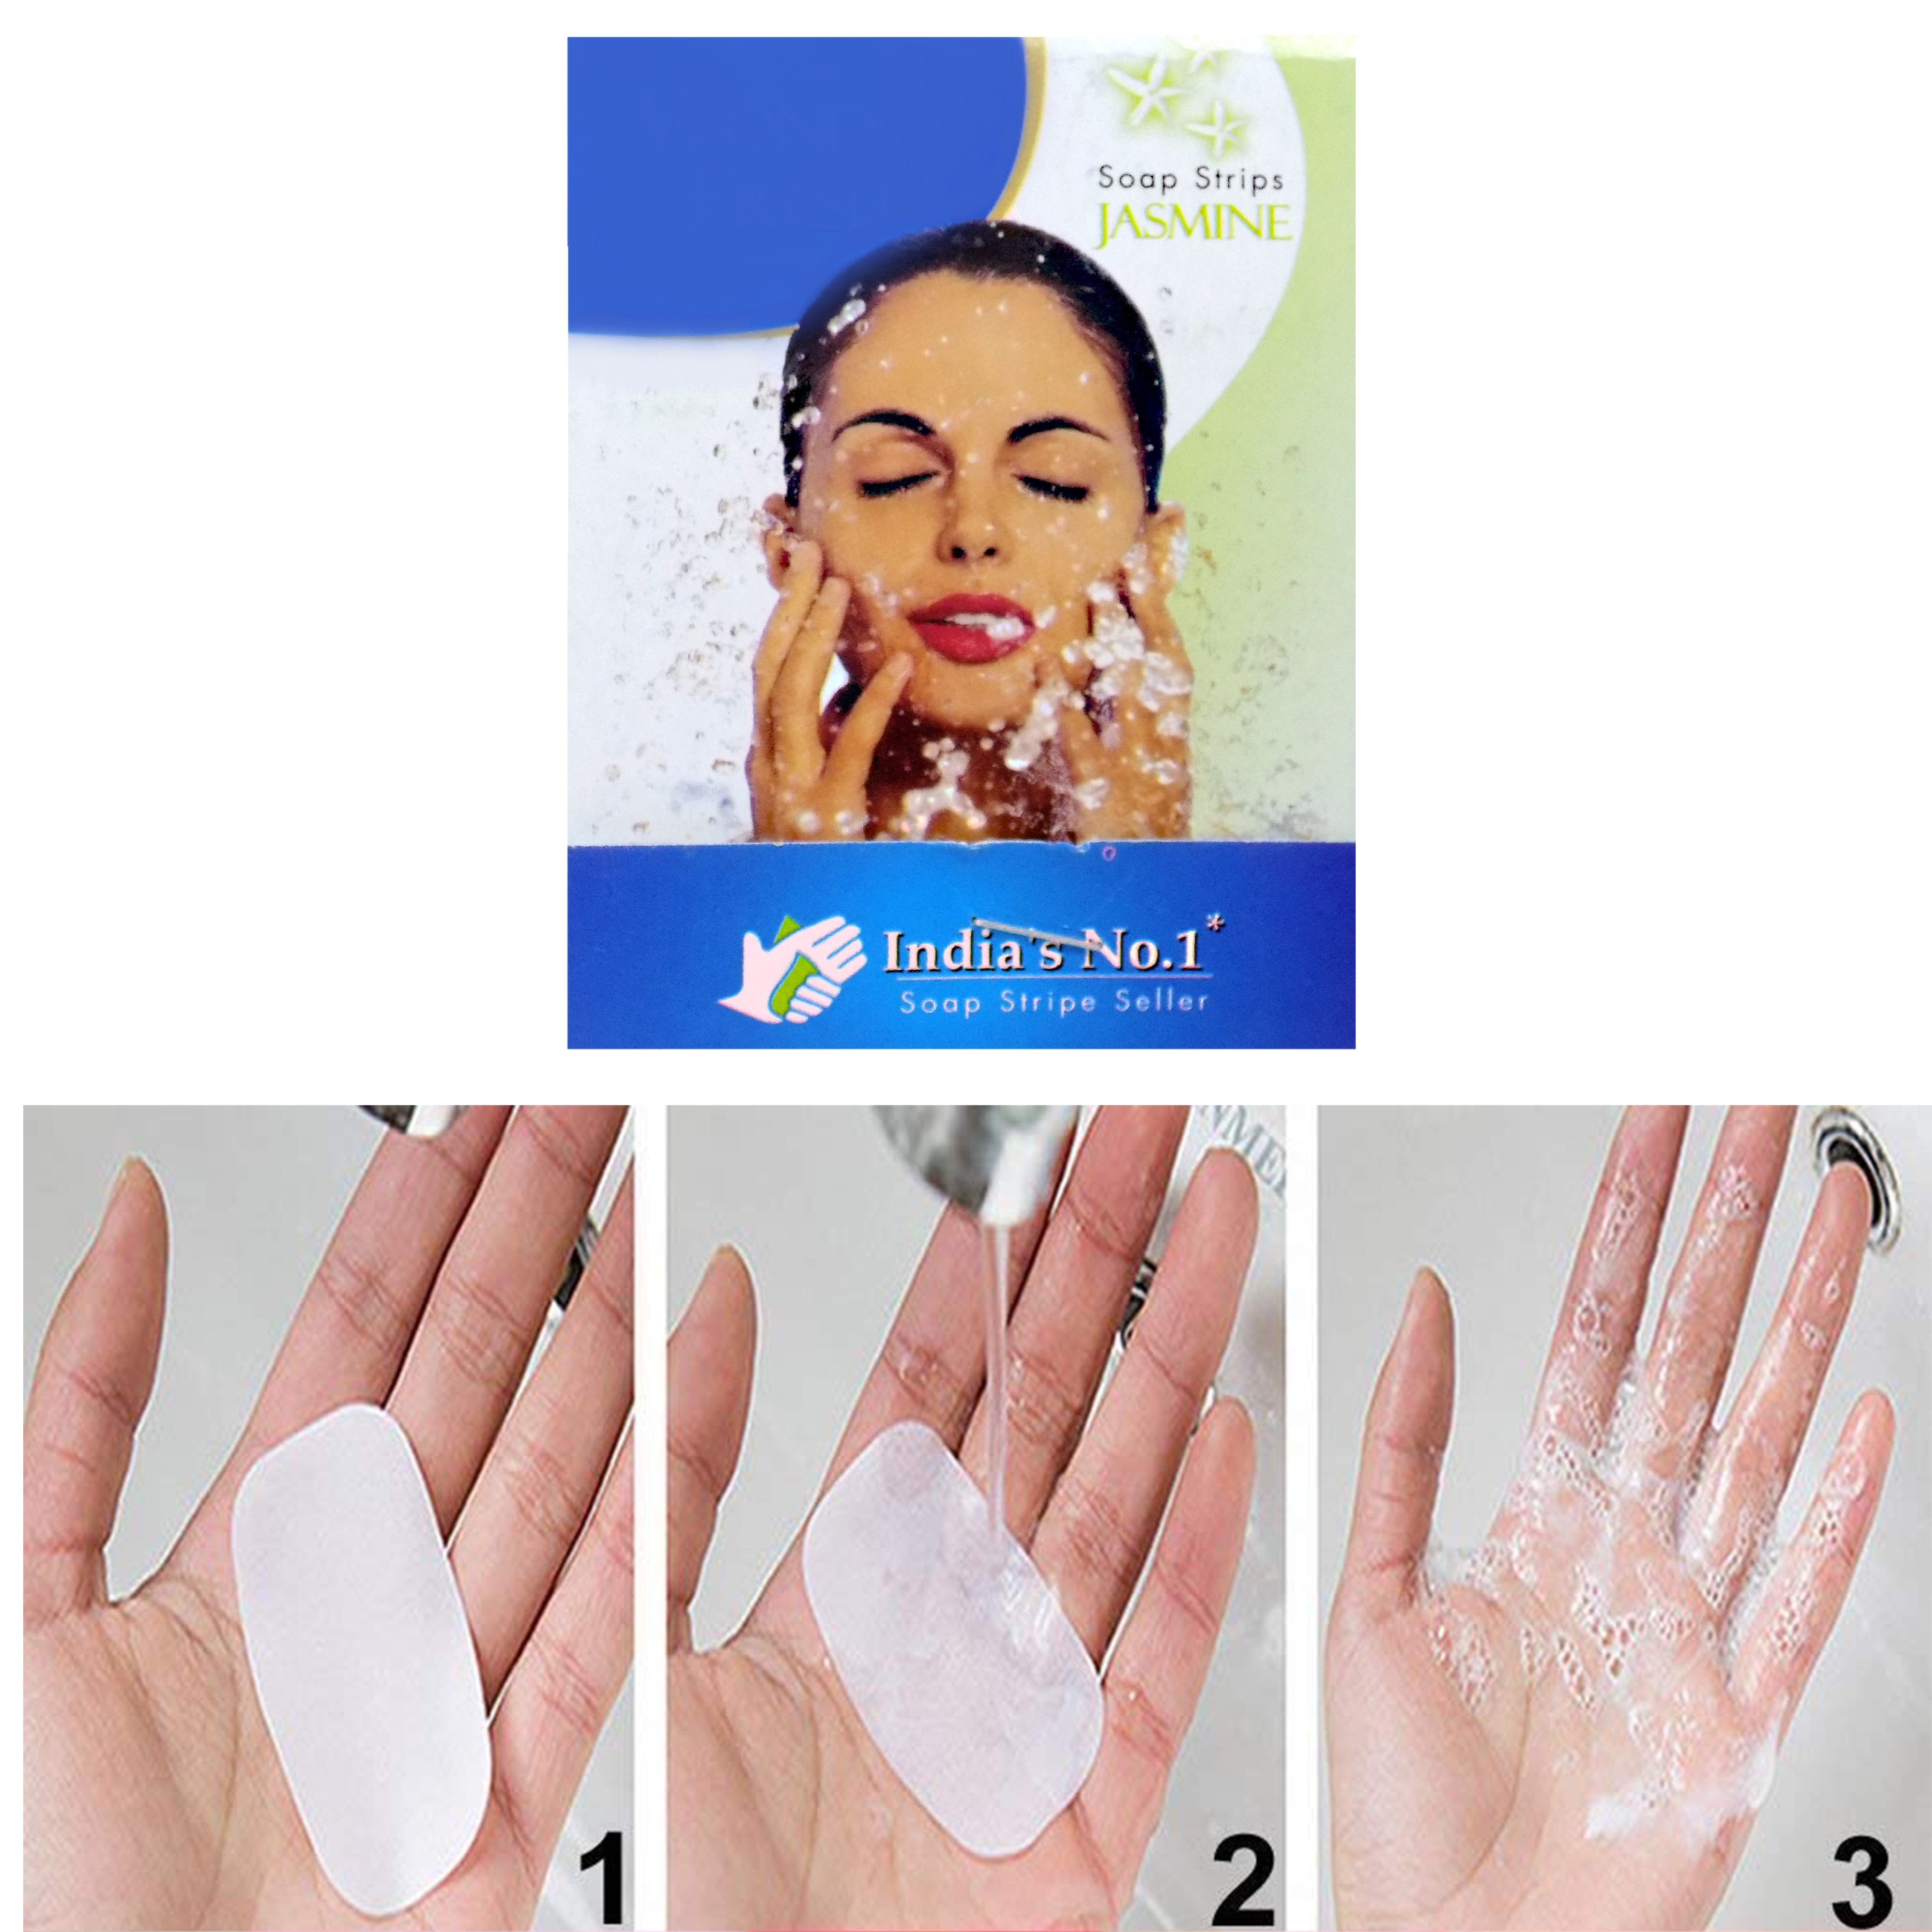 1311 Fresh Paper Soap Strips Traveling Hand Wash with Jasmine Fragrance (100 paper soap strips) - SkyShopy